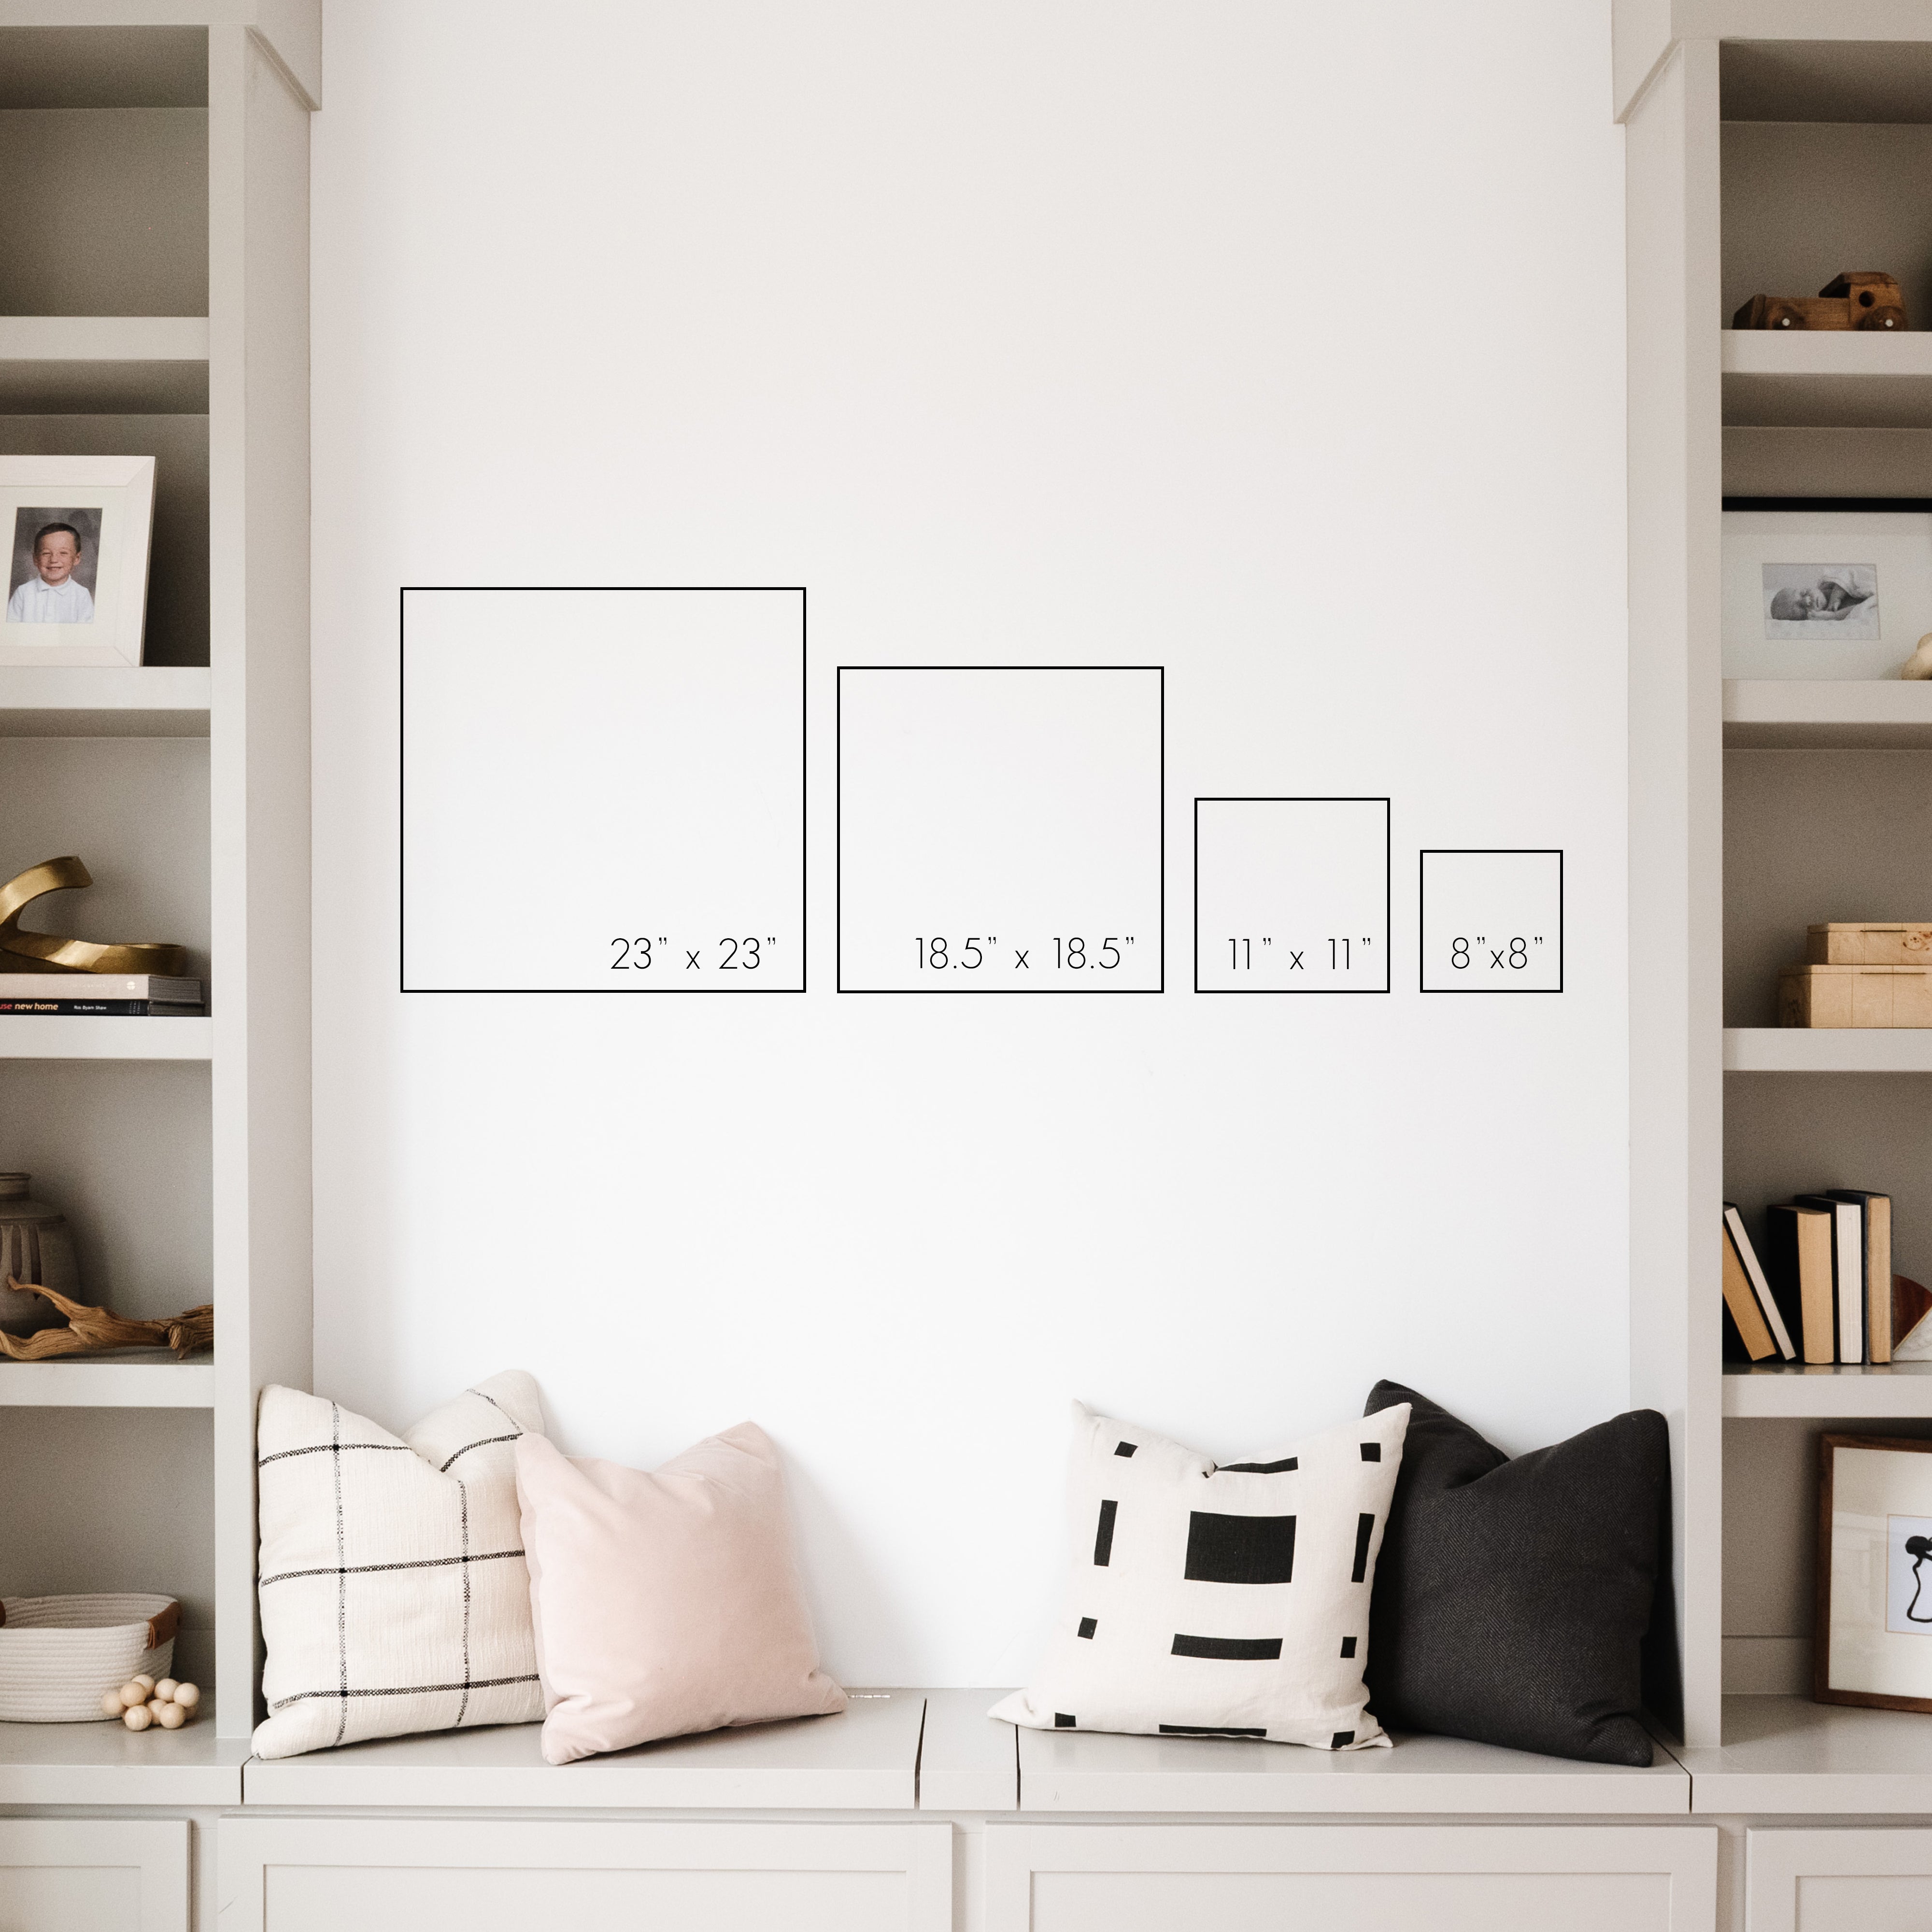 Square Frosted Acrylic Dry-erase Board | Square Pennington